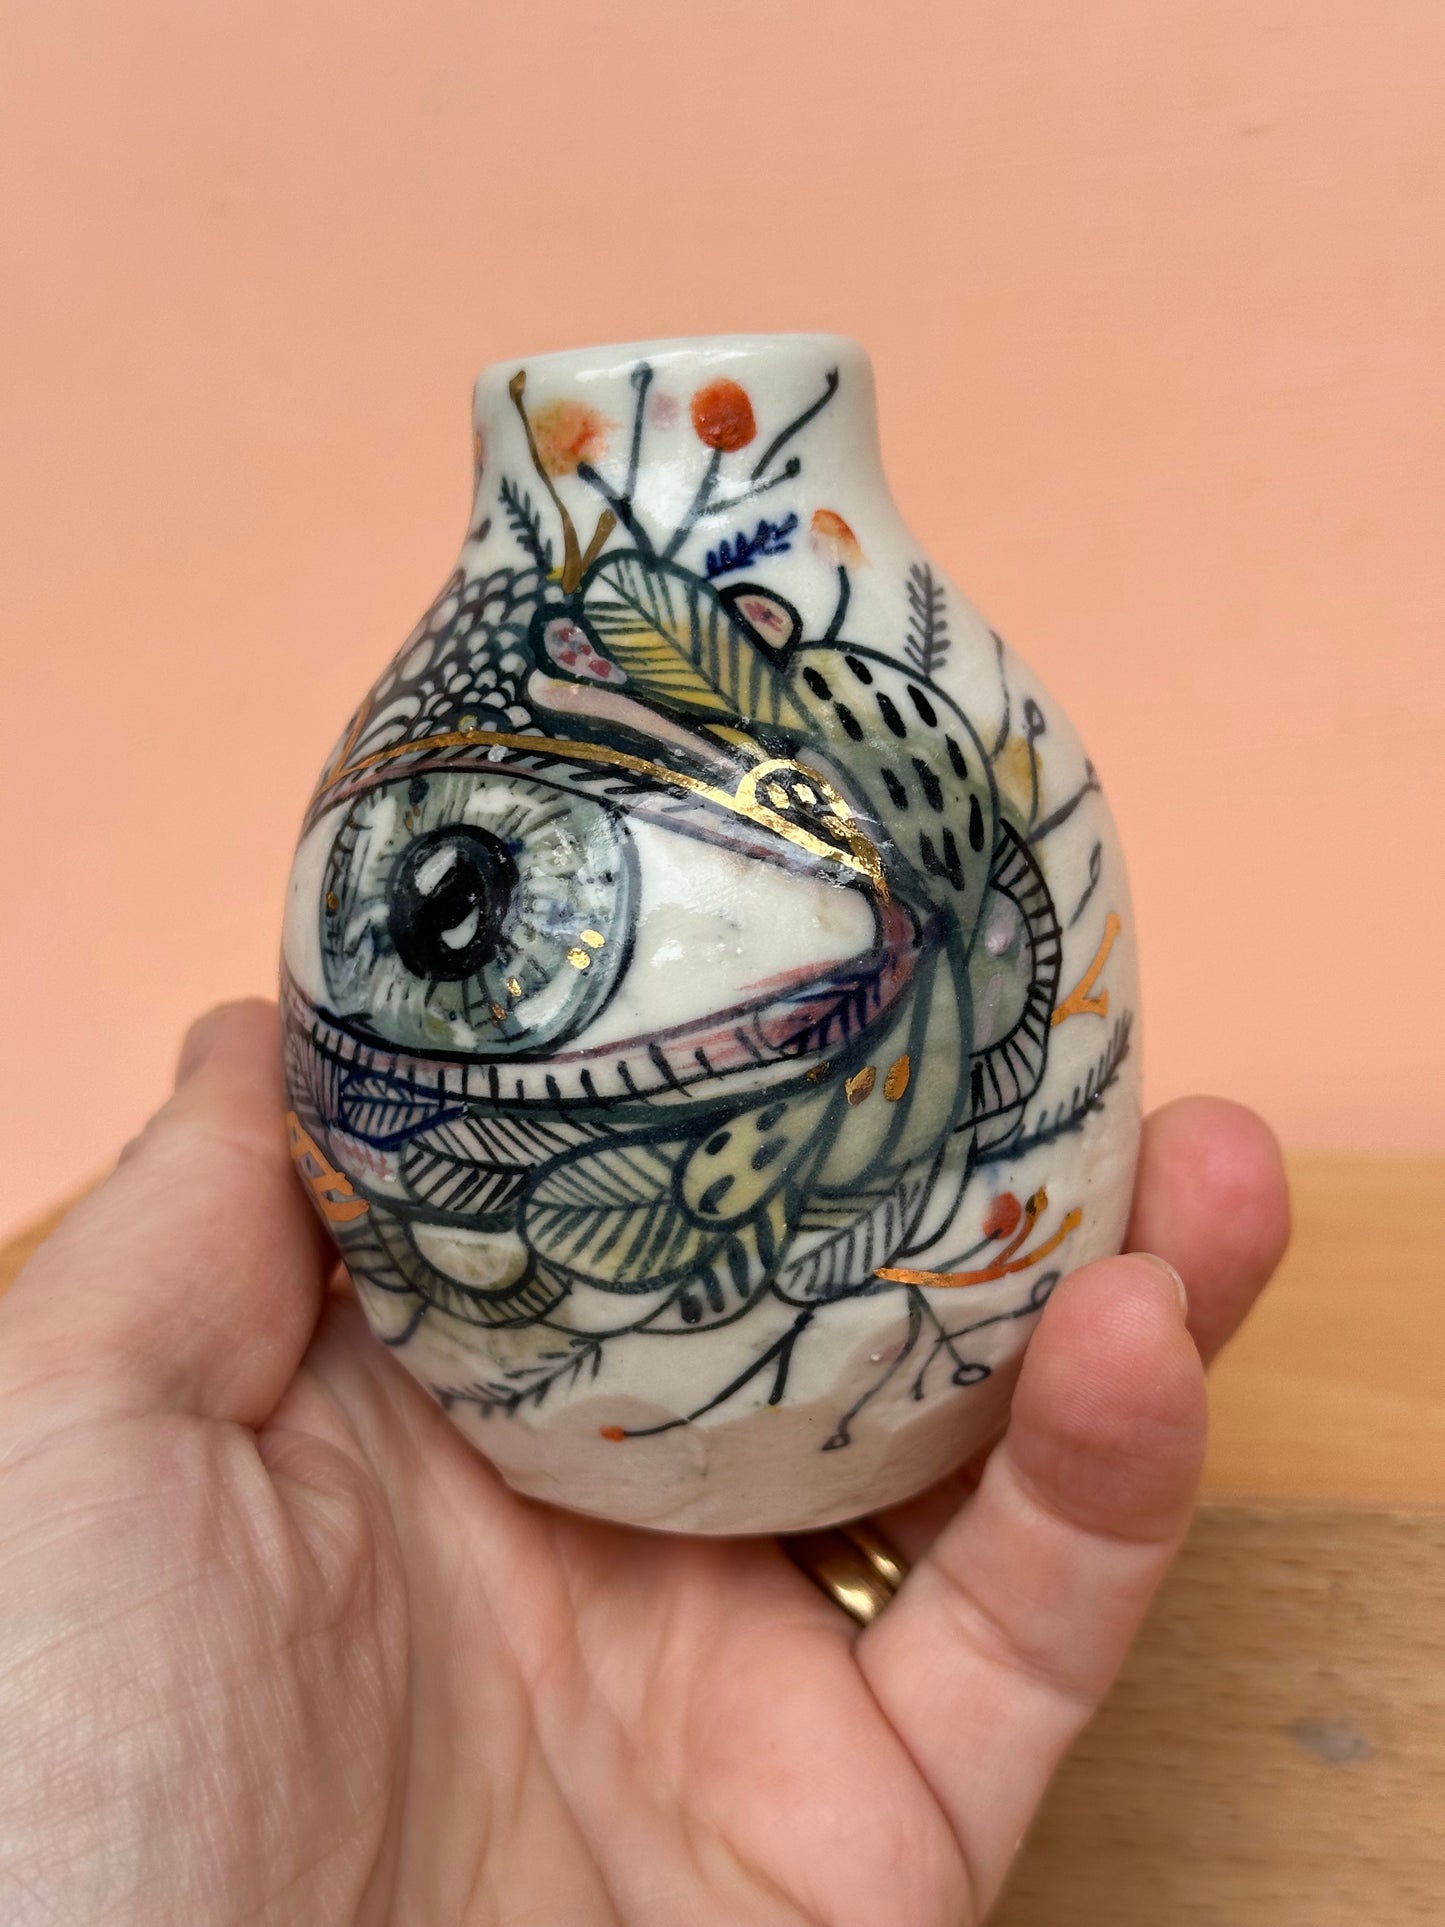 ‘Hand painted ‘the protective eye’ vase